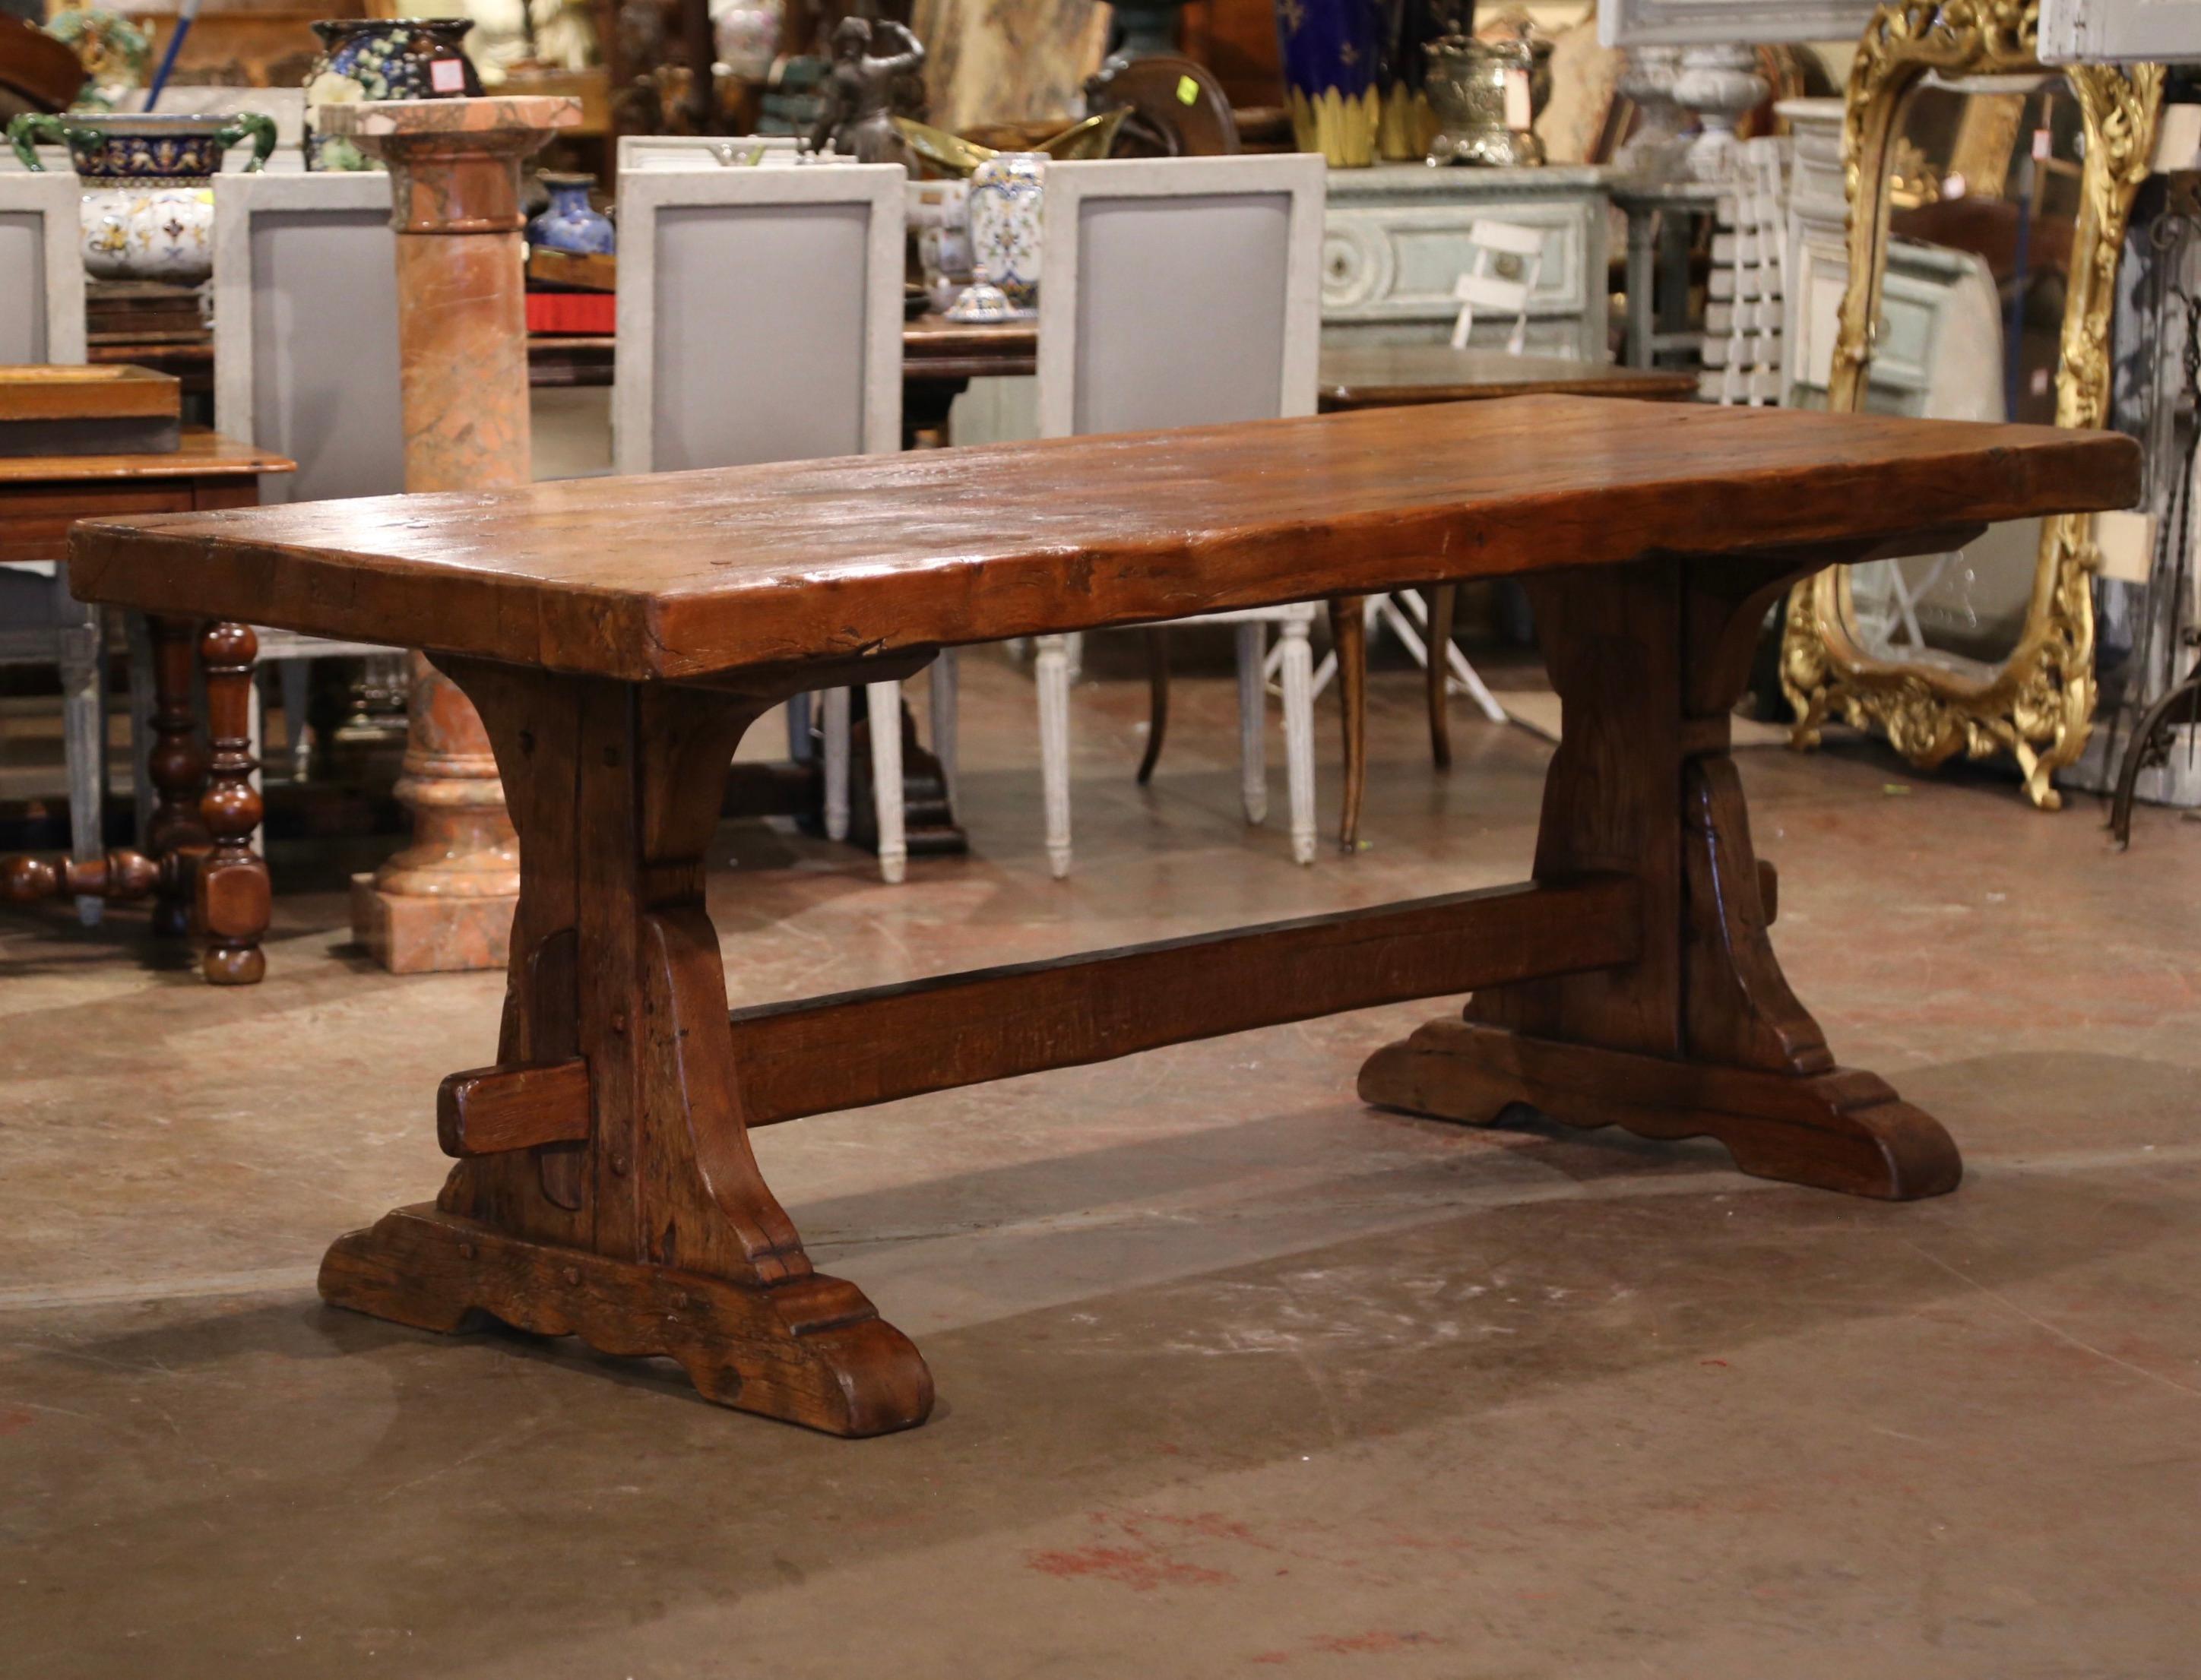 Hand-Carved 18th Century French Carved Oak Farm Trestle Table from Normandy